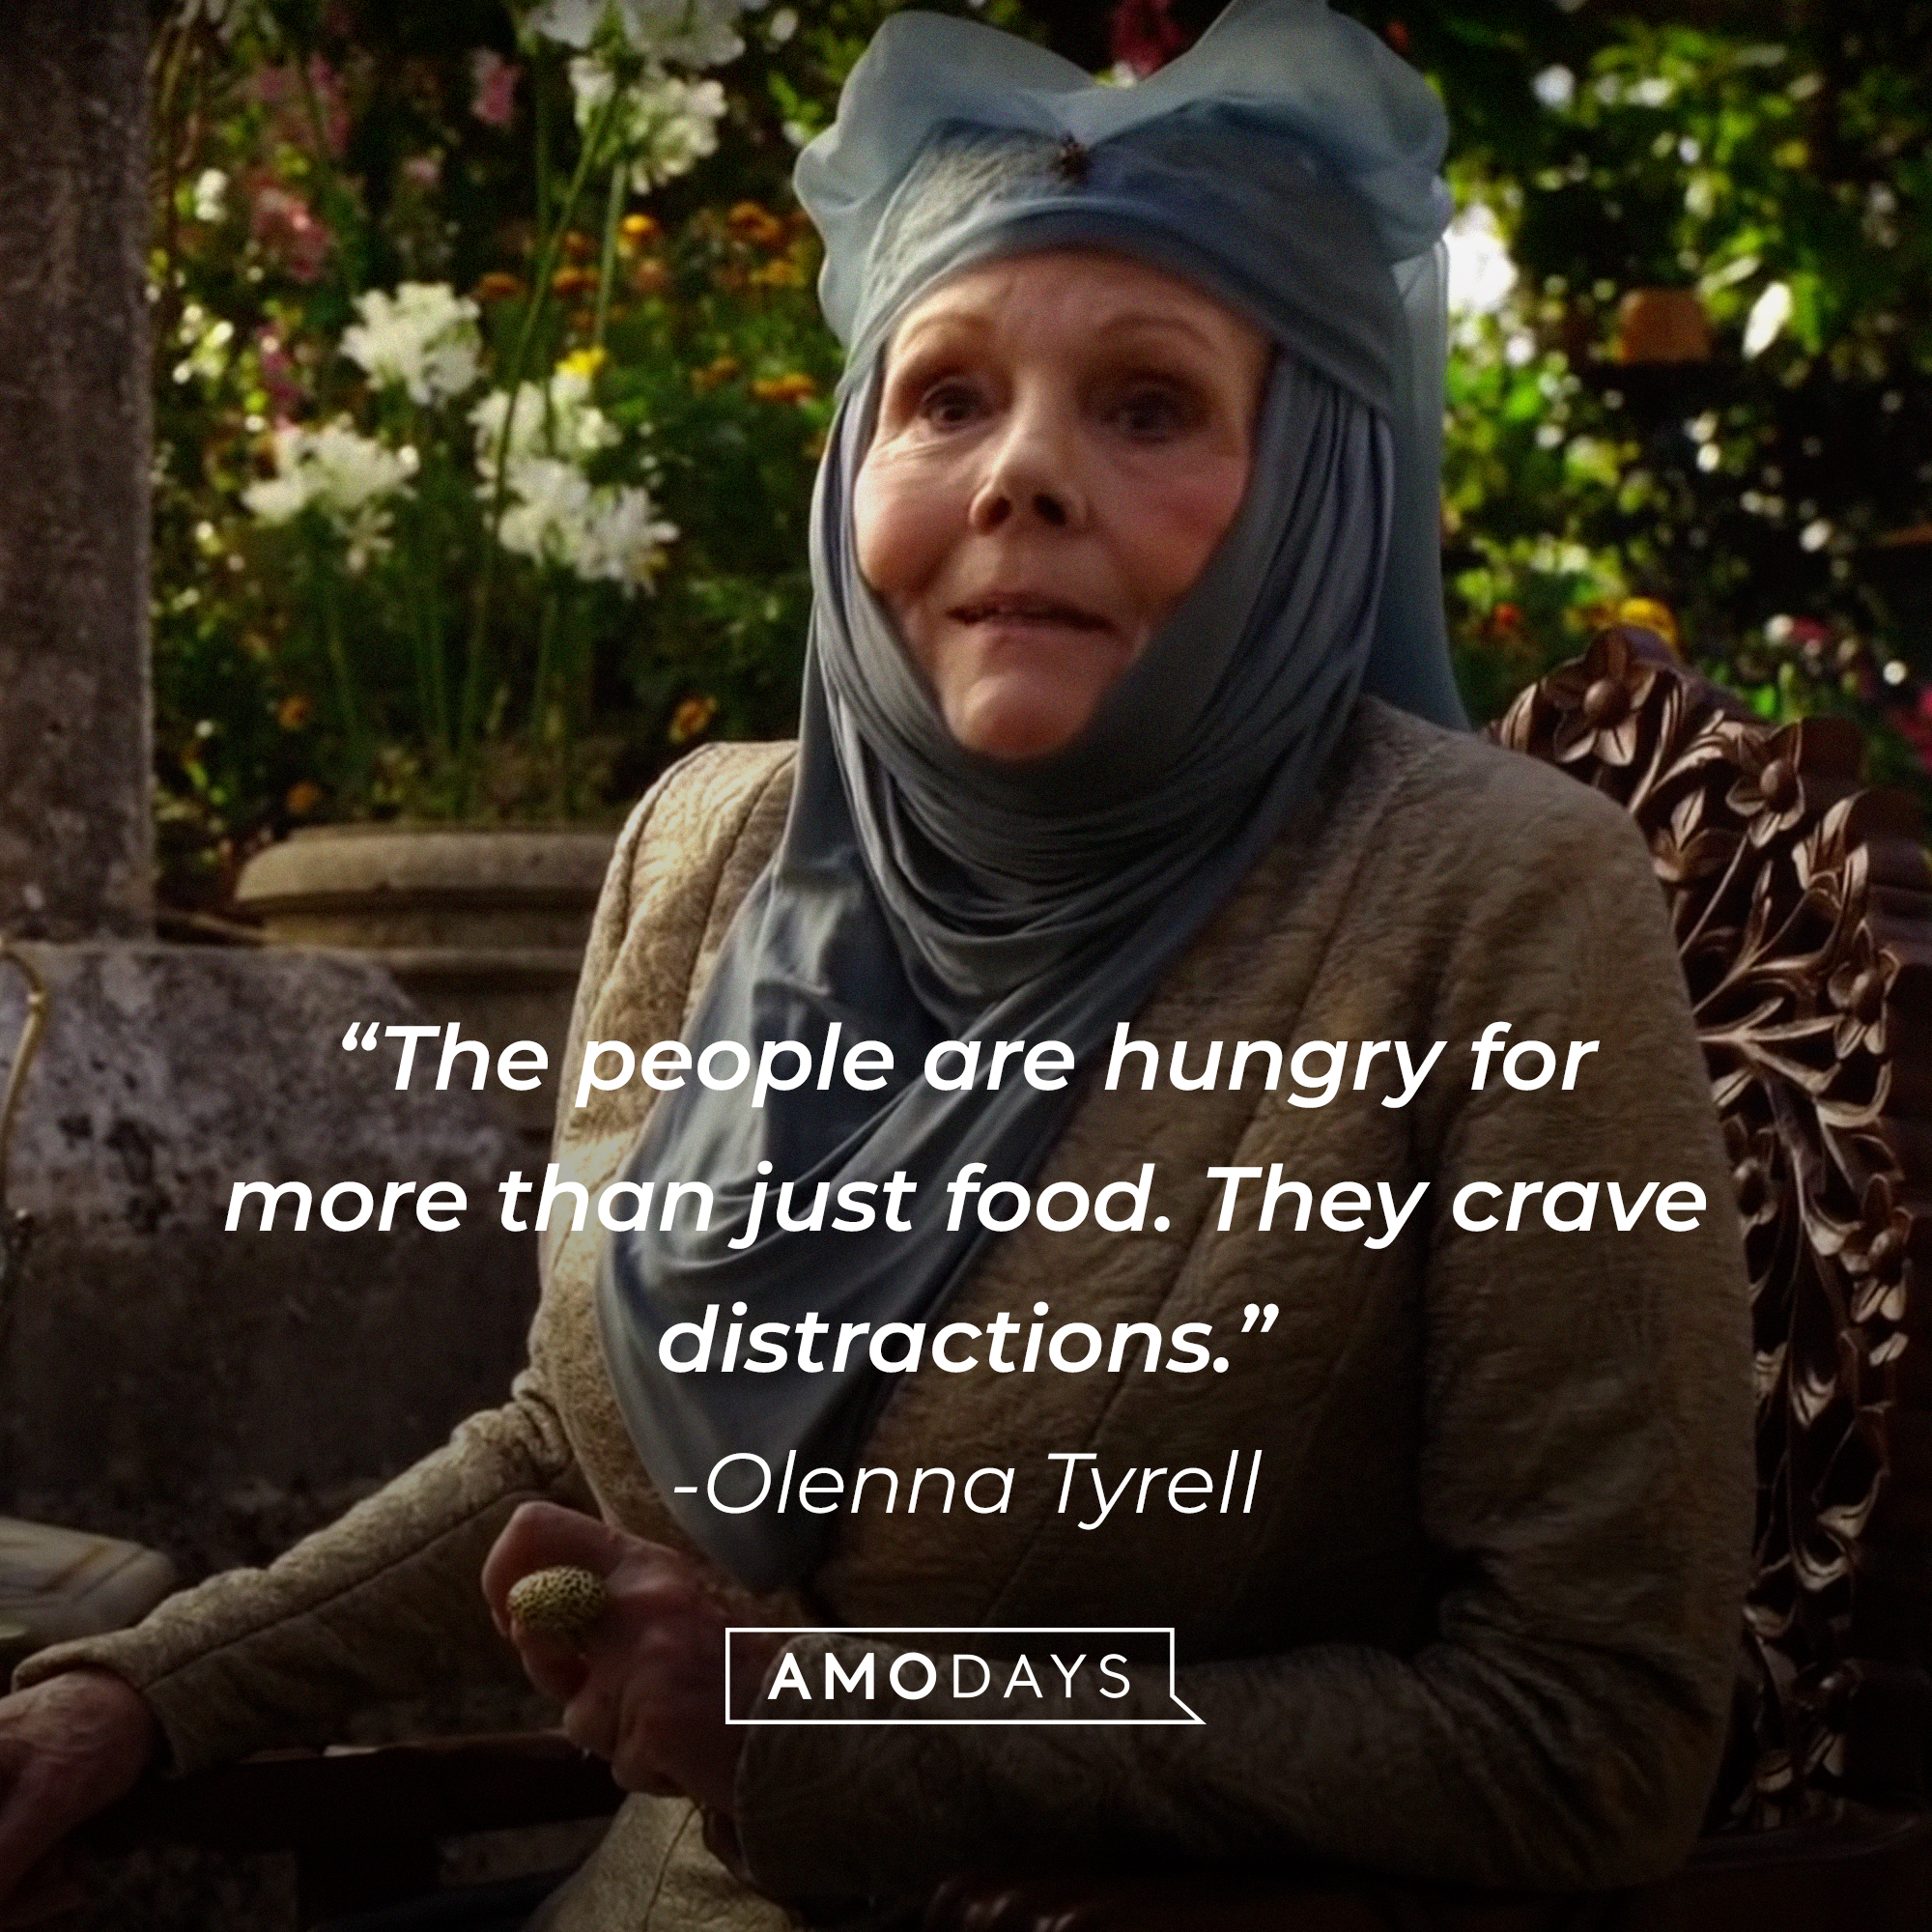 Olenna Tyrell, with her quote: "The people are hungry for more than just food. They crave distractions.” │Source:  facebook.com/GameOfThrones